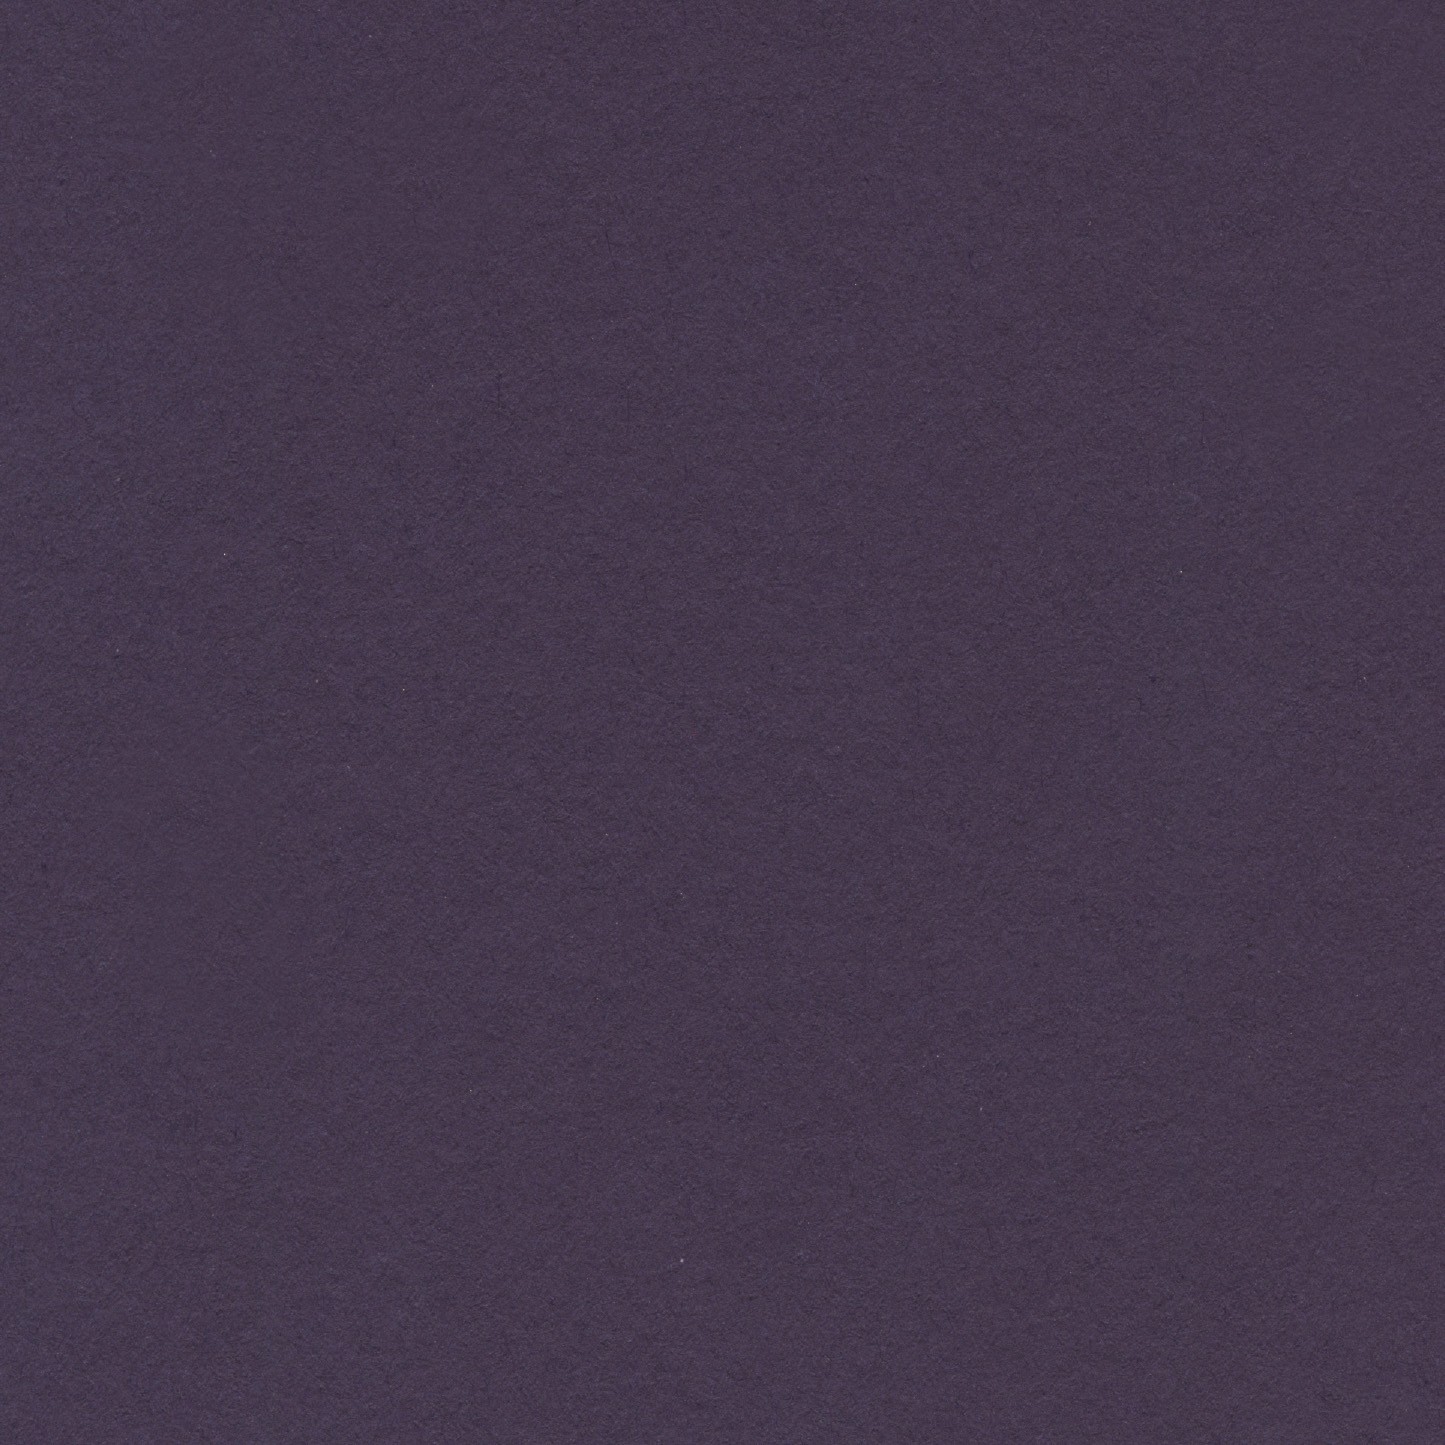 Pearlescent - Amethyst 120gsm